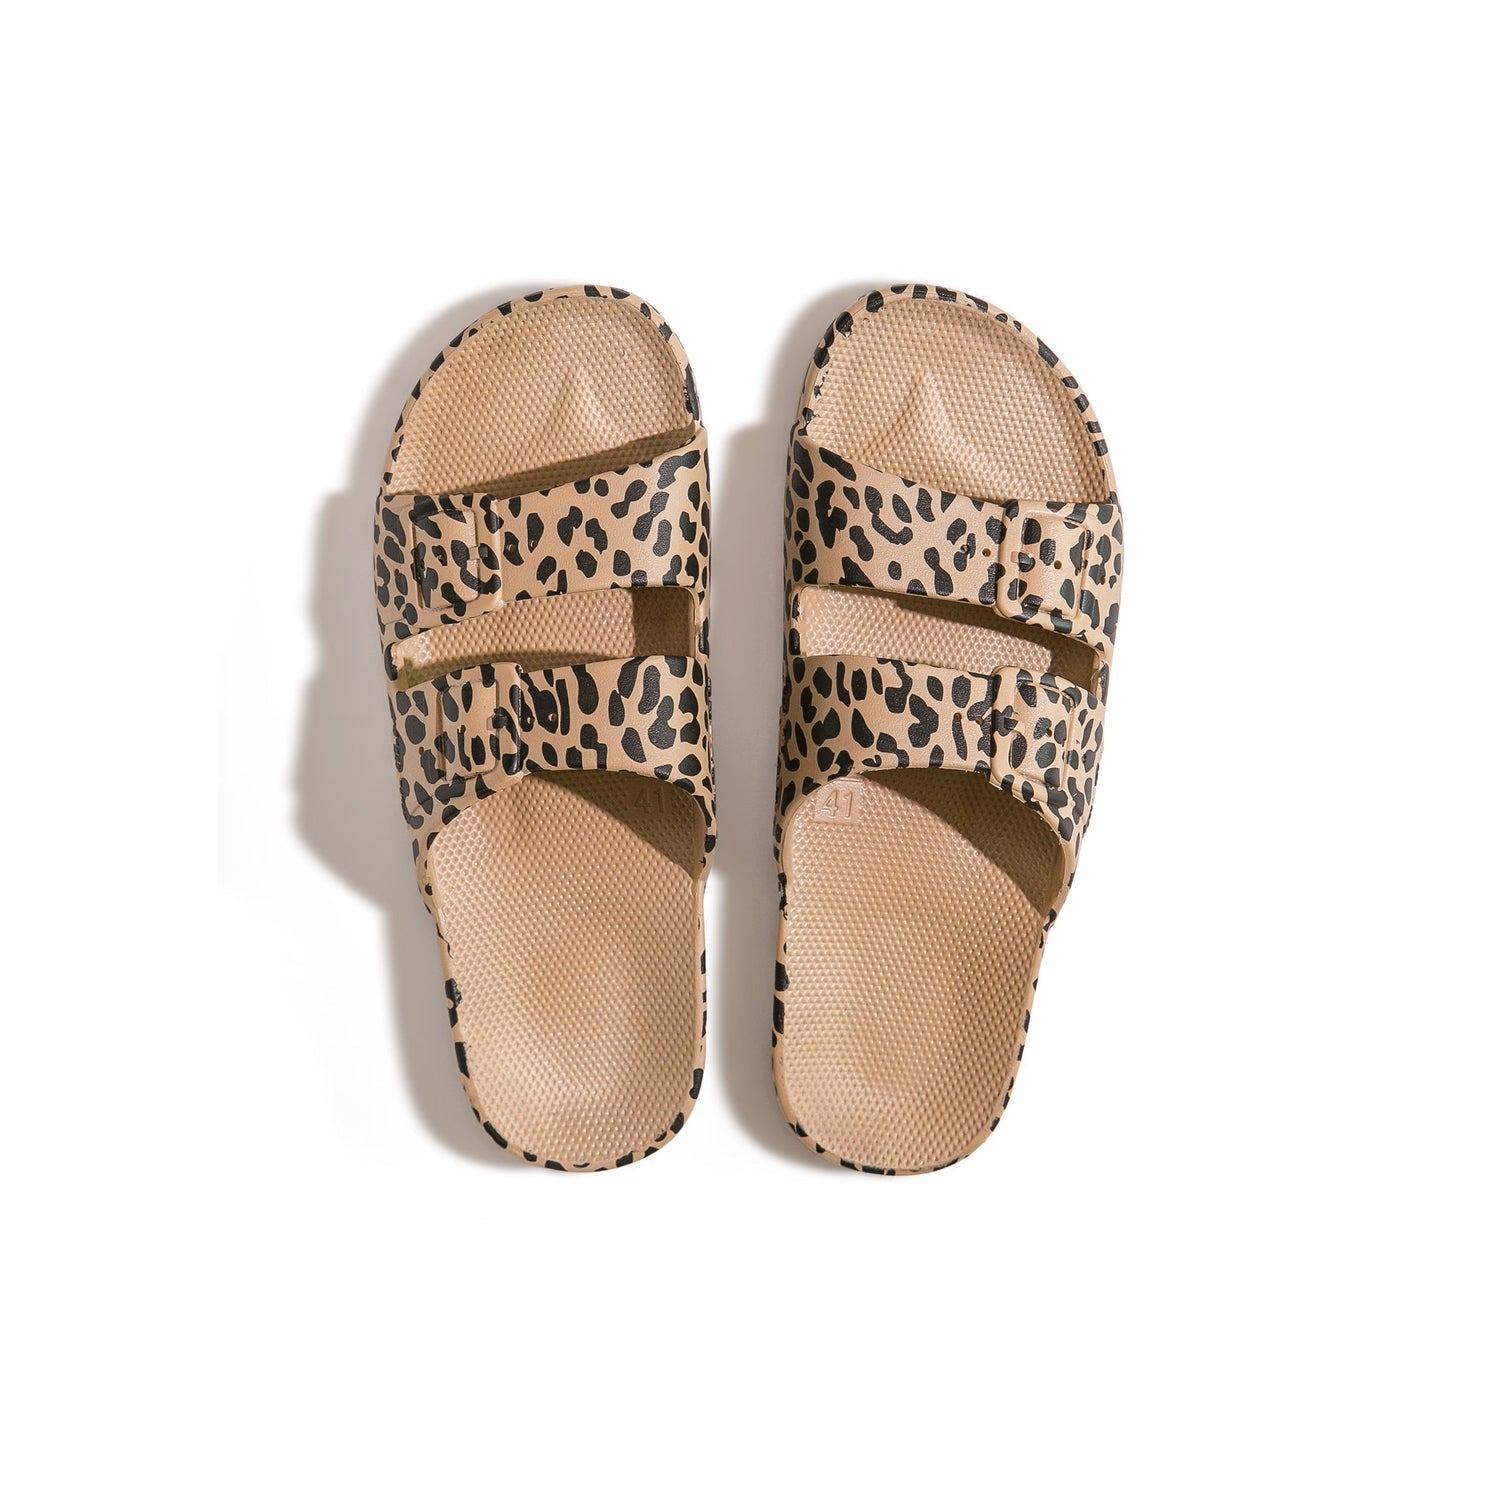 Slippers Freedom Moses Prints Leo Camel Sandals Neo Family 